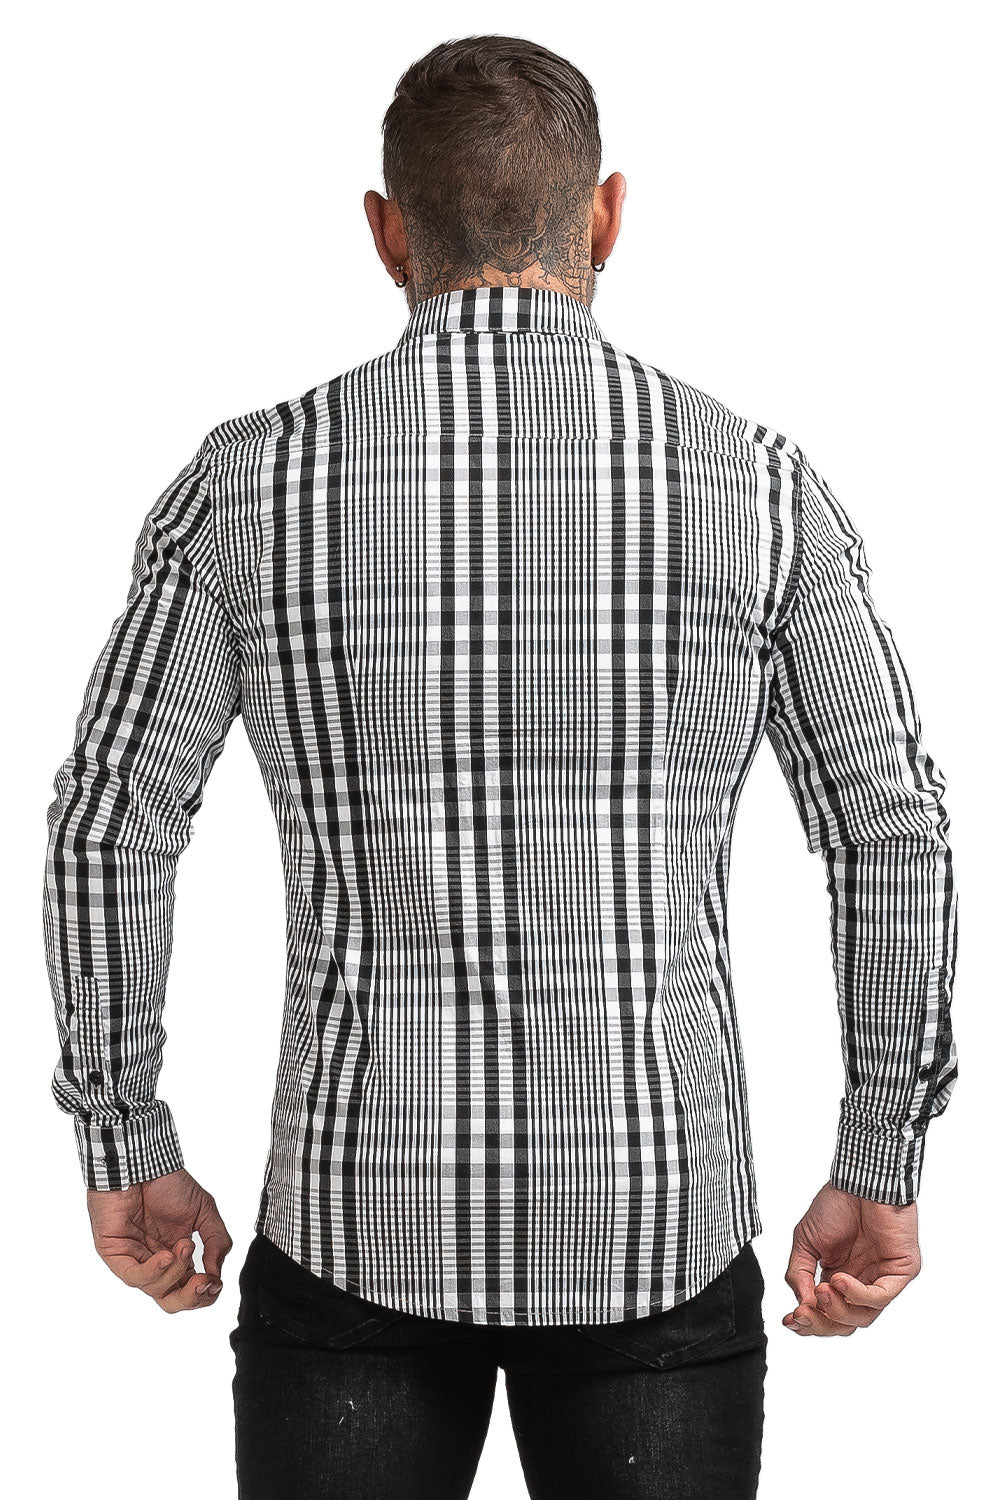 Gingtto Grey Stripe Plaid Shirts With High Quality For Men